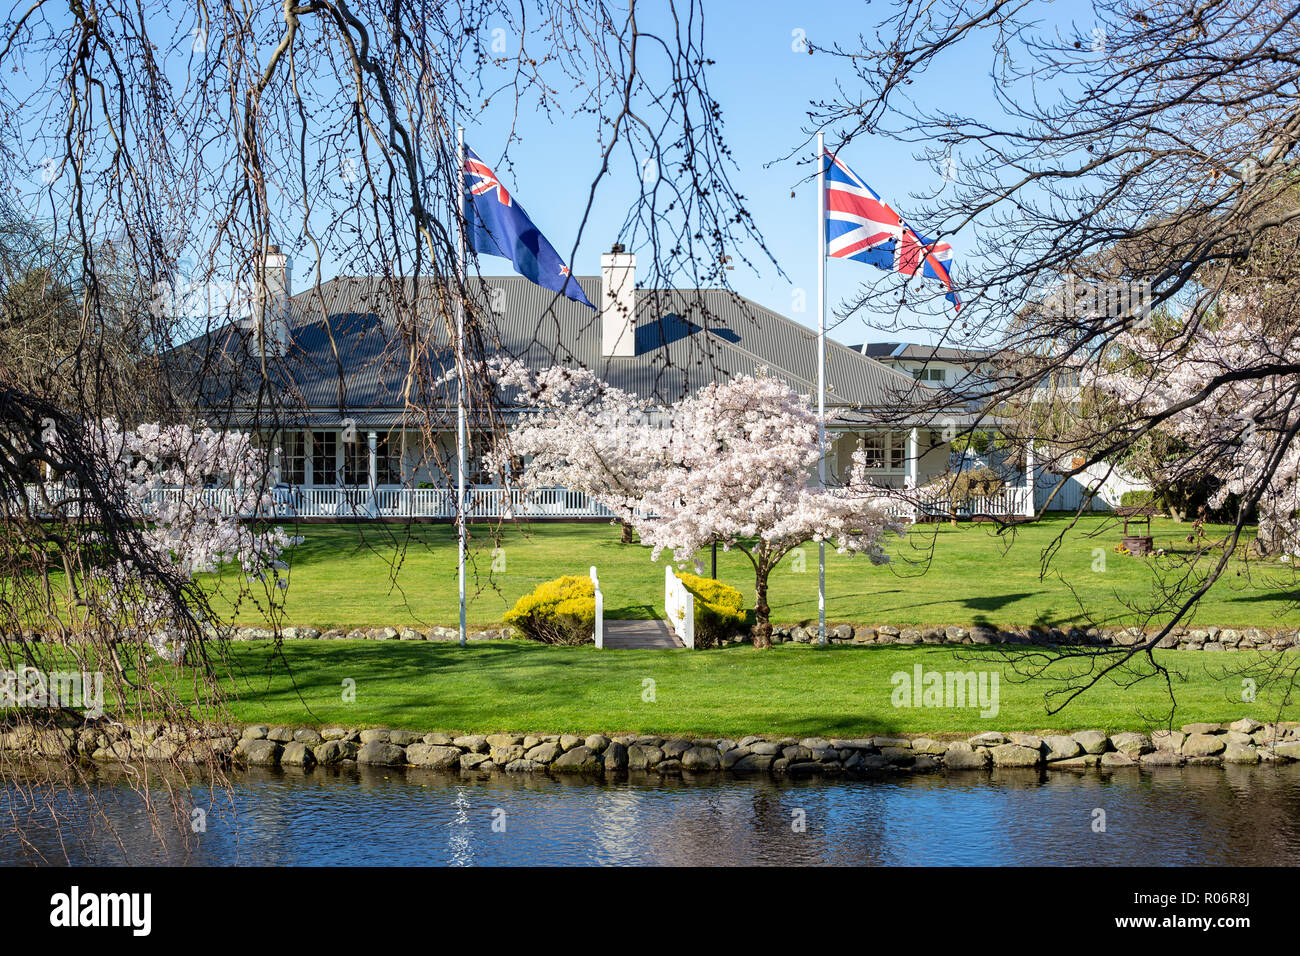 Flags flying on the grassy banks of the Avon River in Mona Vale, Christchurch Stock Photo